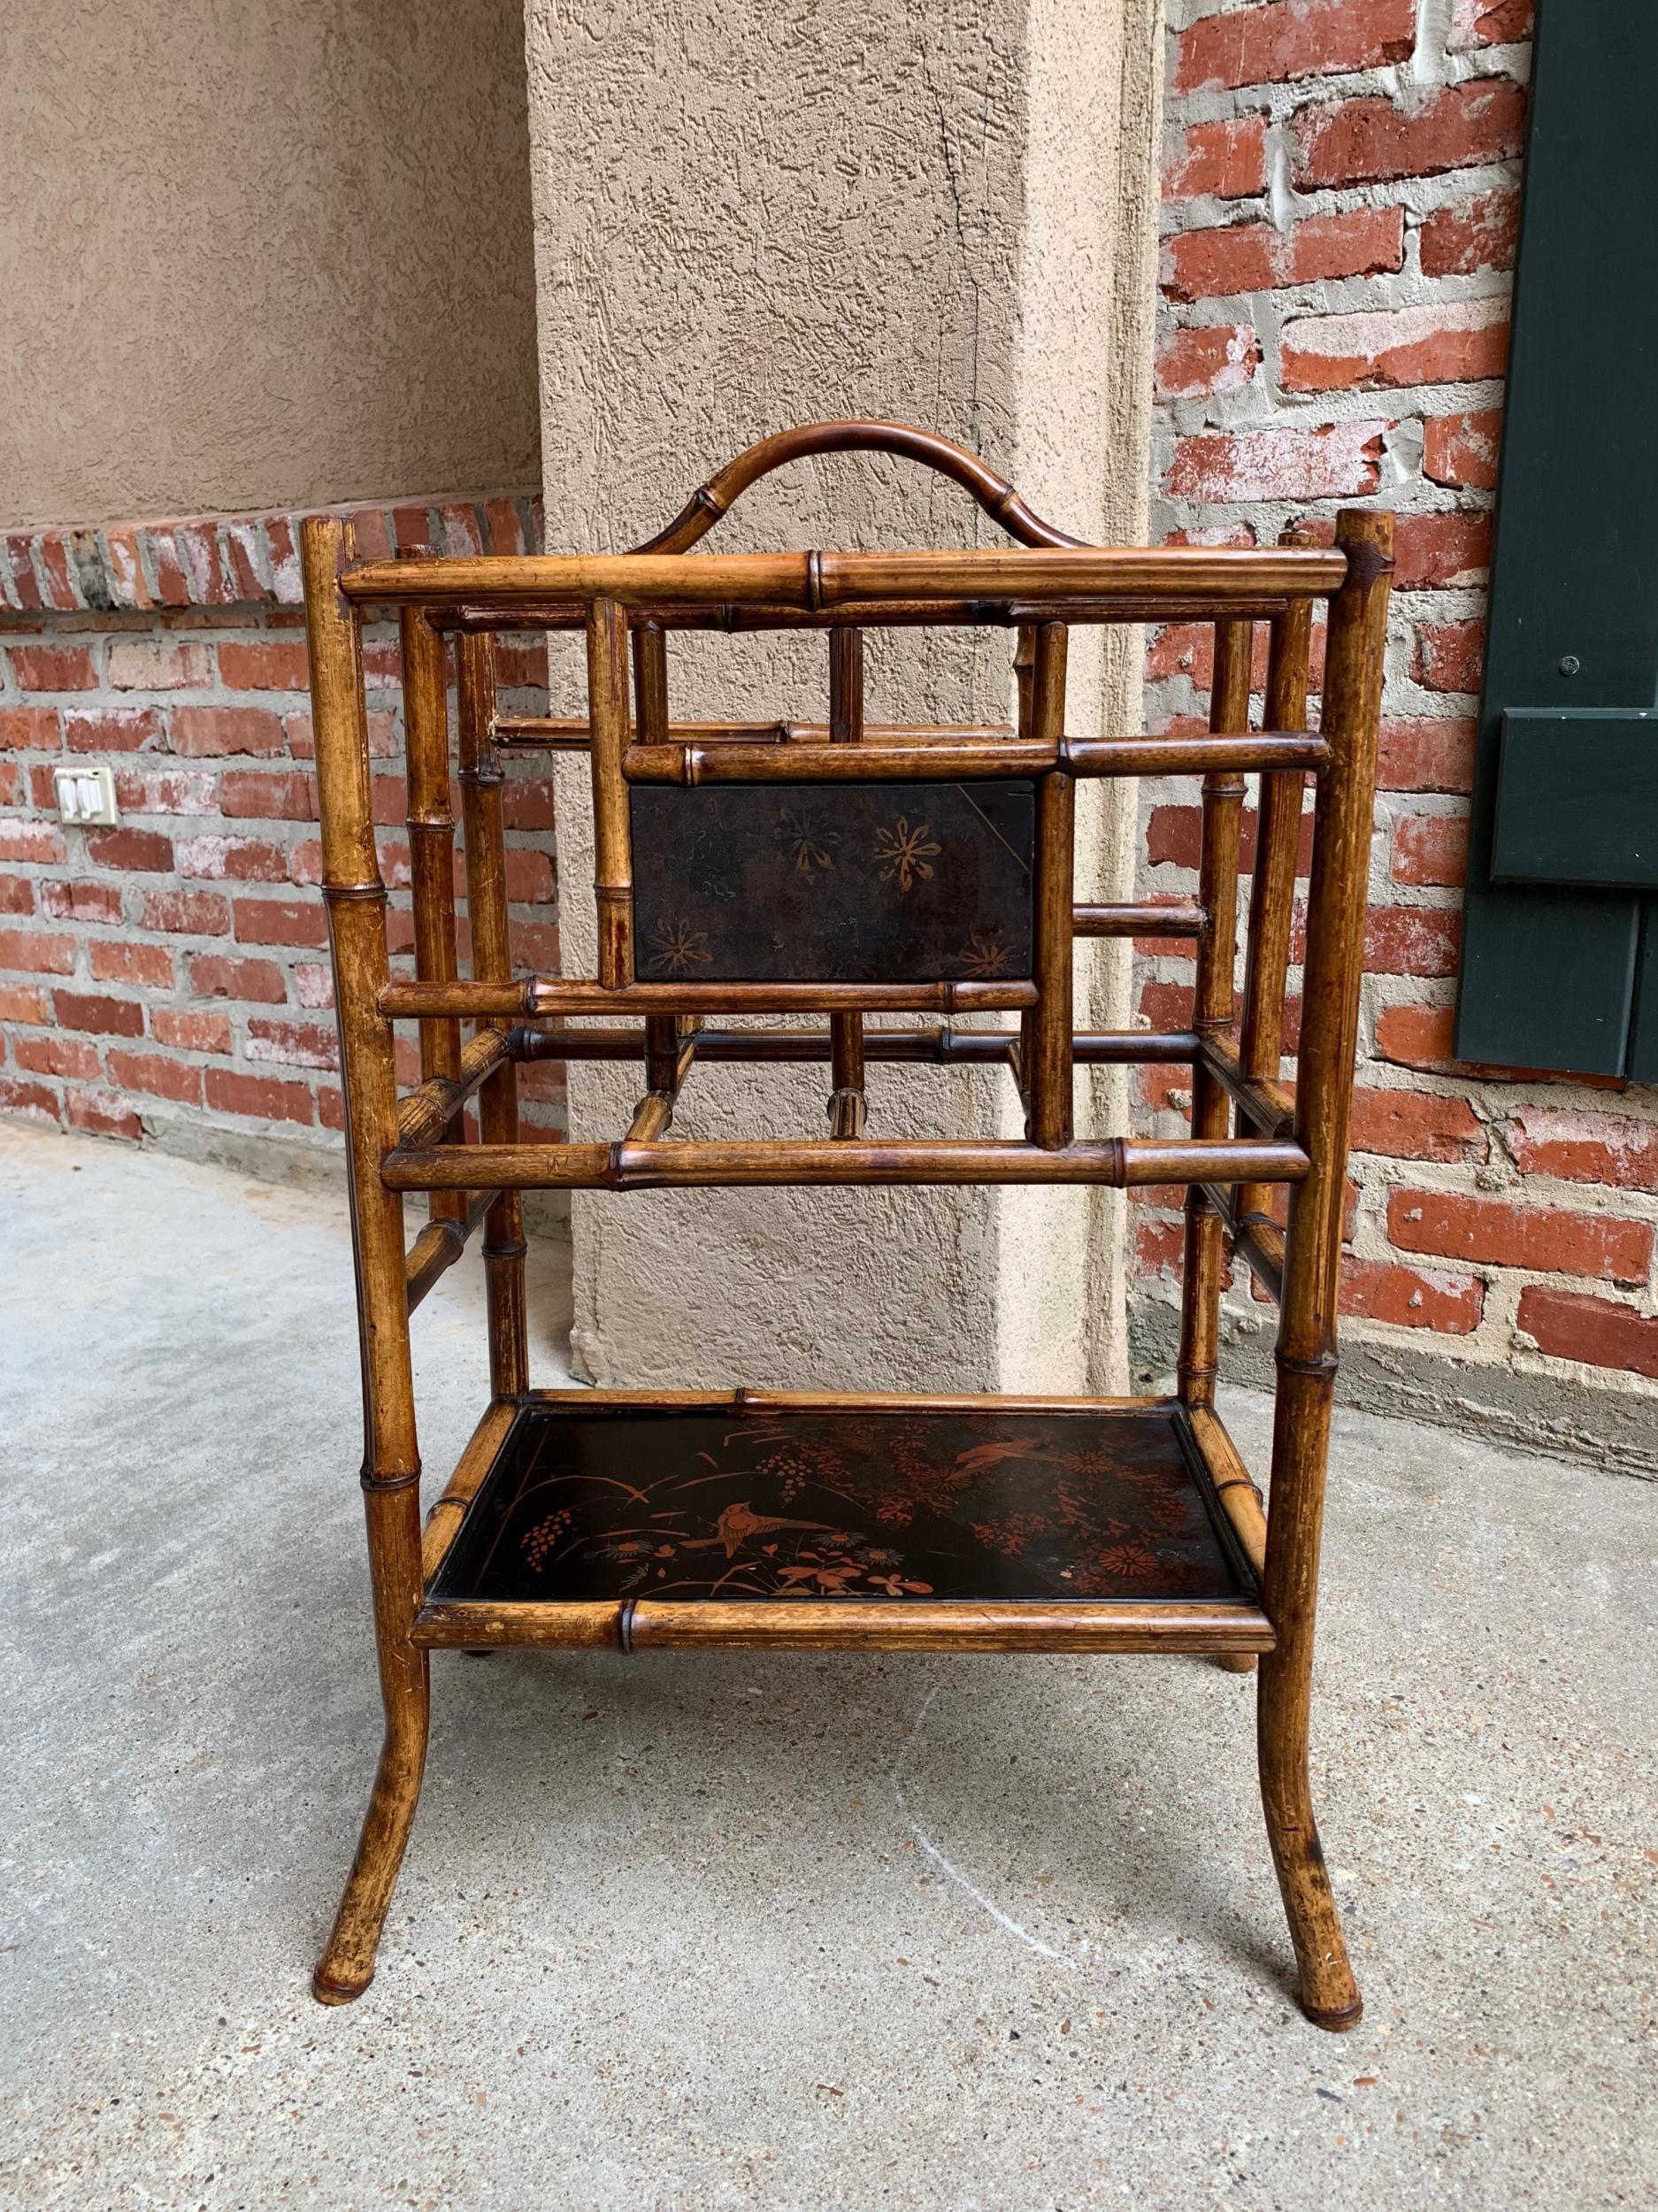 Antique English Bamboo Canterbury Magazine Rack Music Stand Table w Chinoiserie inlays.

~Direct from England~
~A charming antique English bamboo Canterbury/magazine racke/music stand with decorative bird themed lacquer panels on each side and the